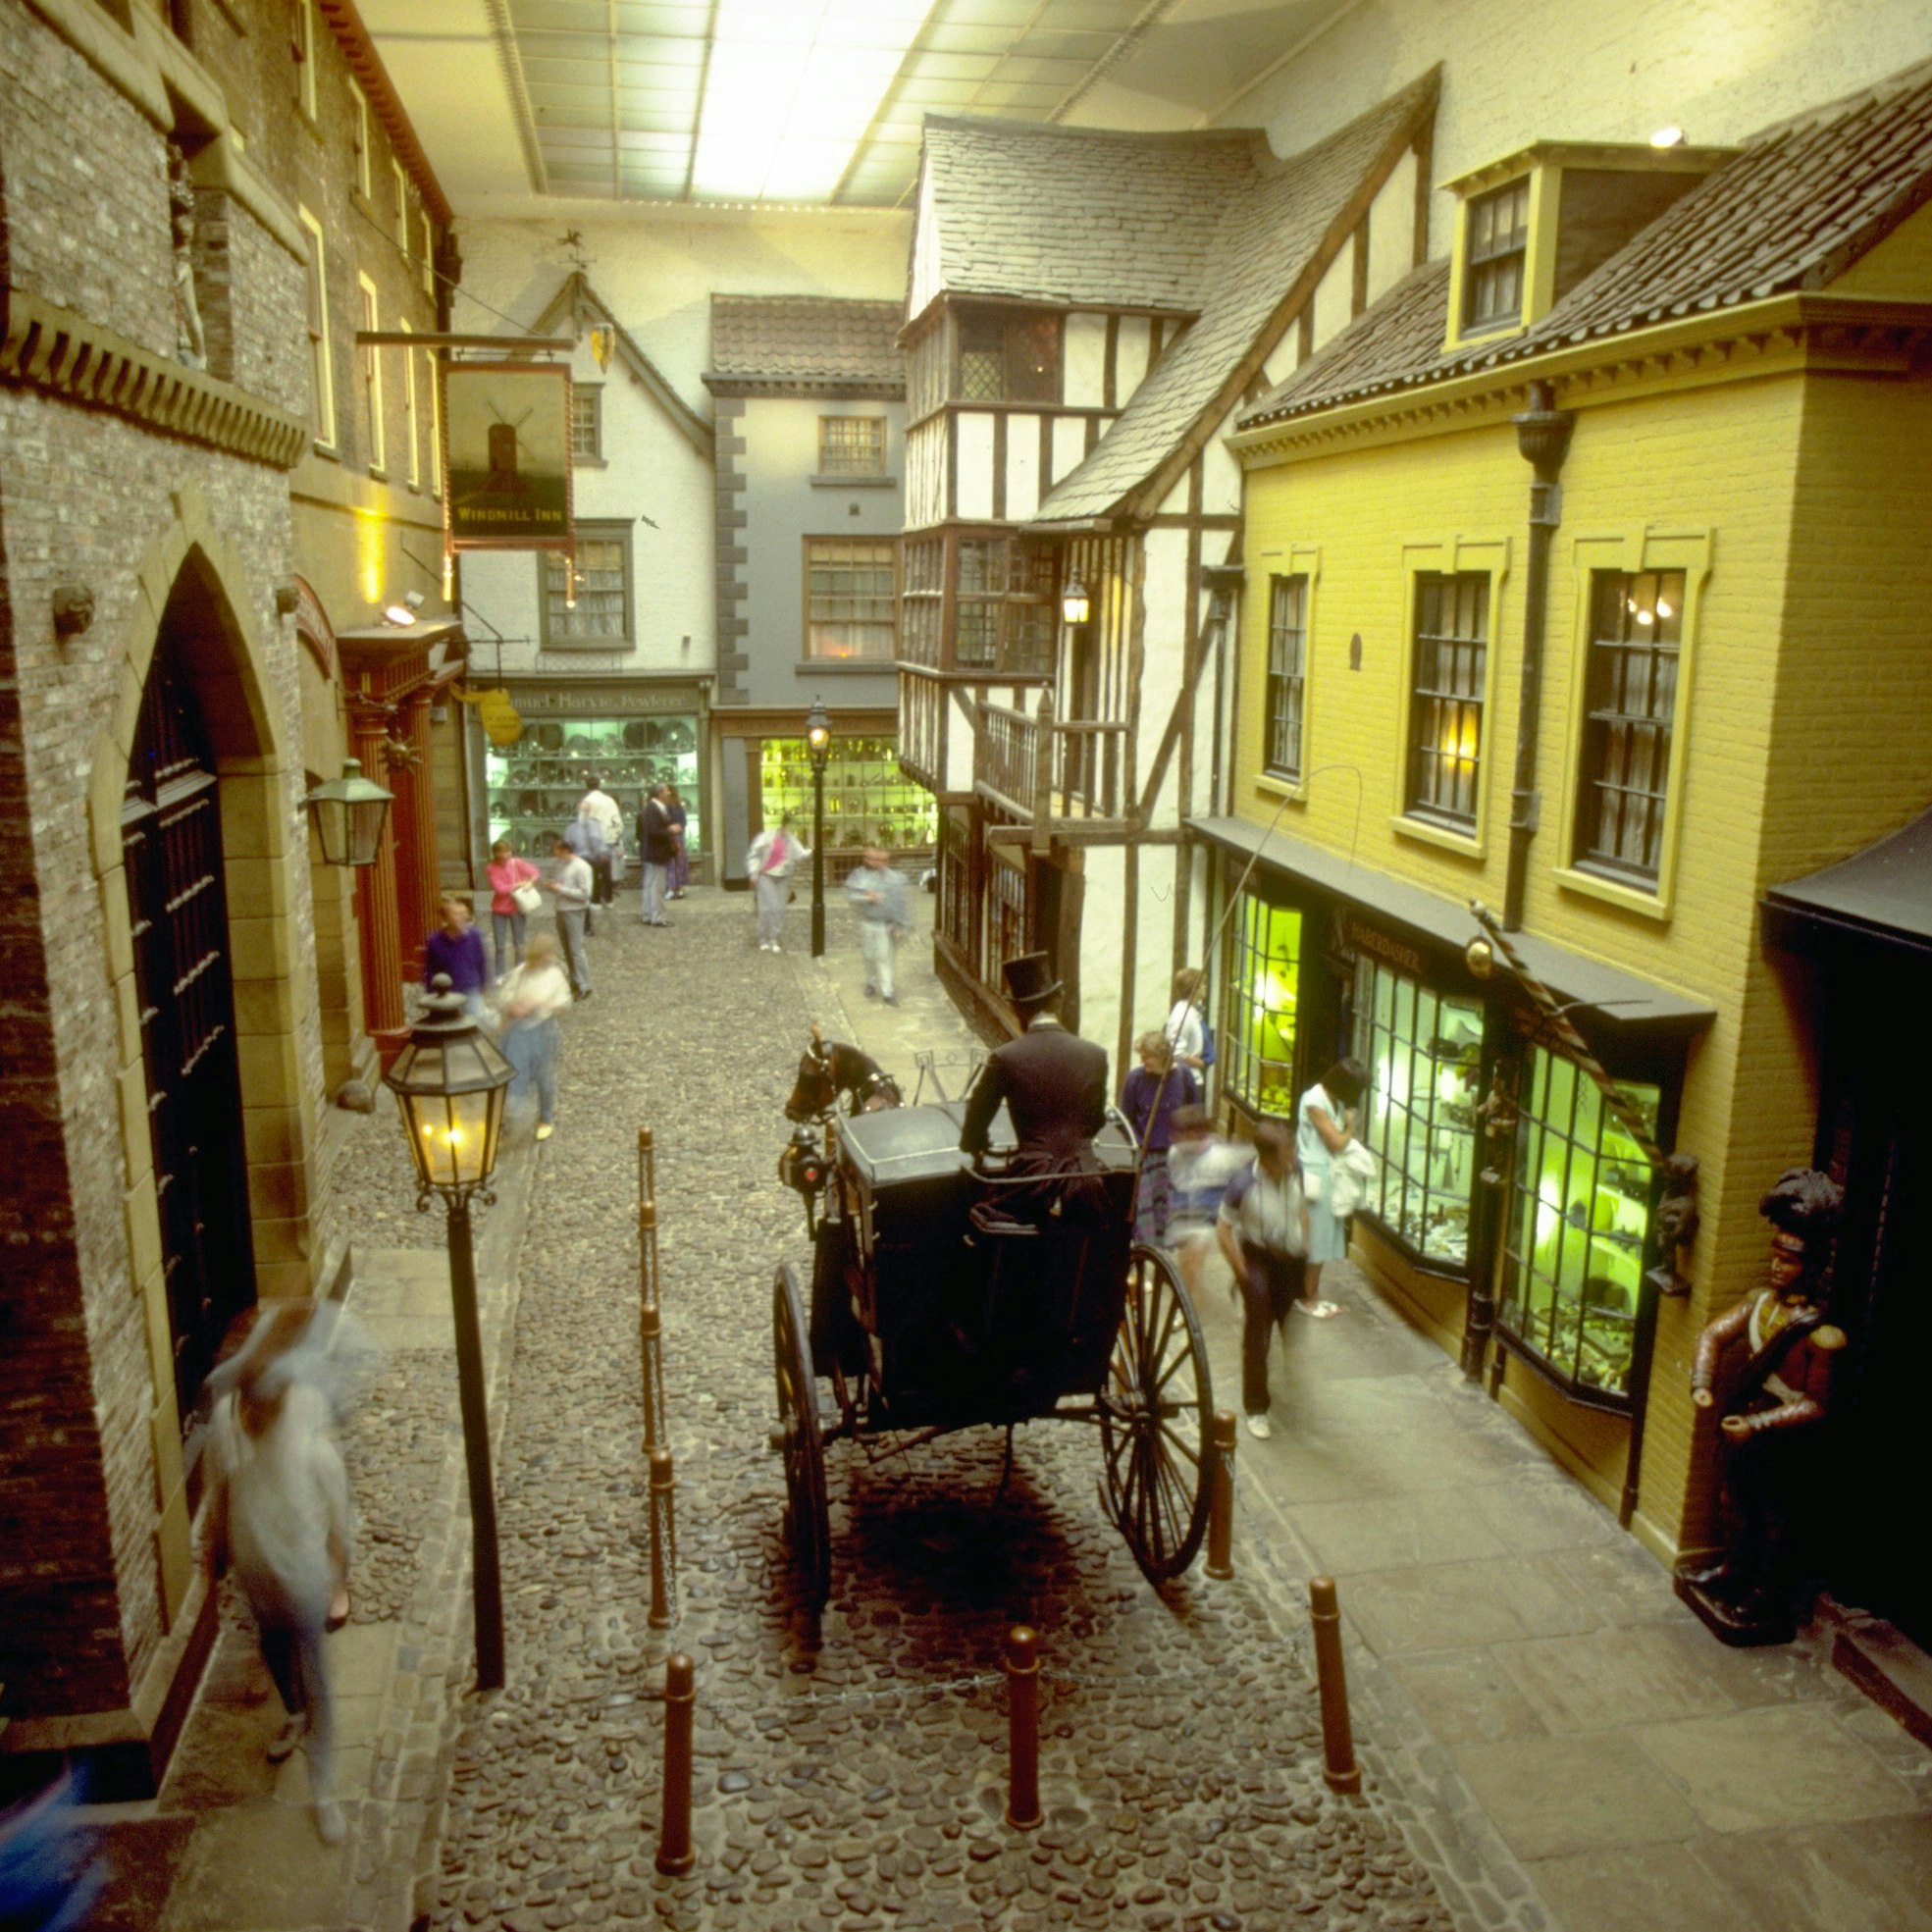 Visitors walk along model shops and carriages of a Victorian street scene in the York Castle Museum in York, England.
Victorian Street in York Castle Museum - stock photo

